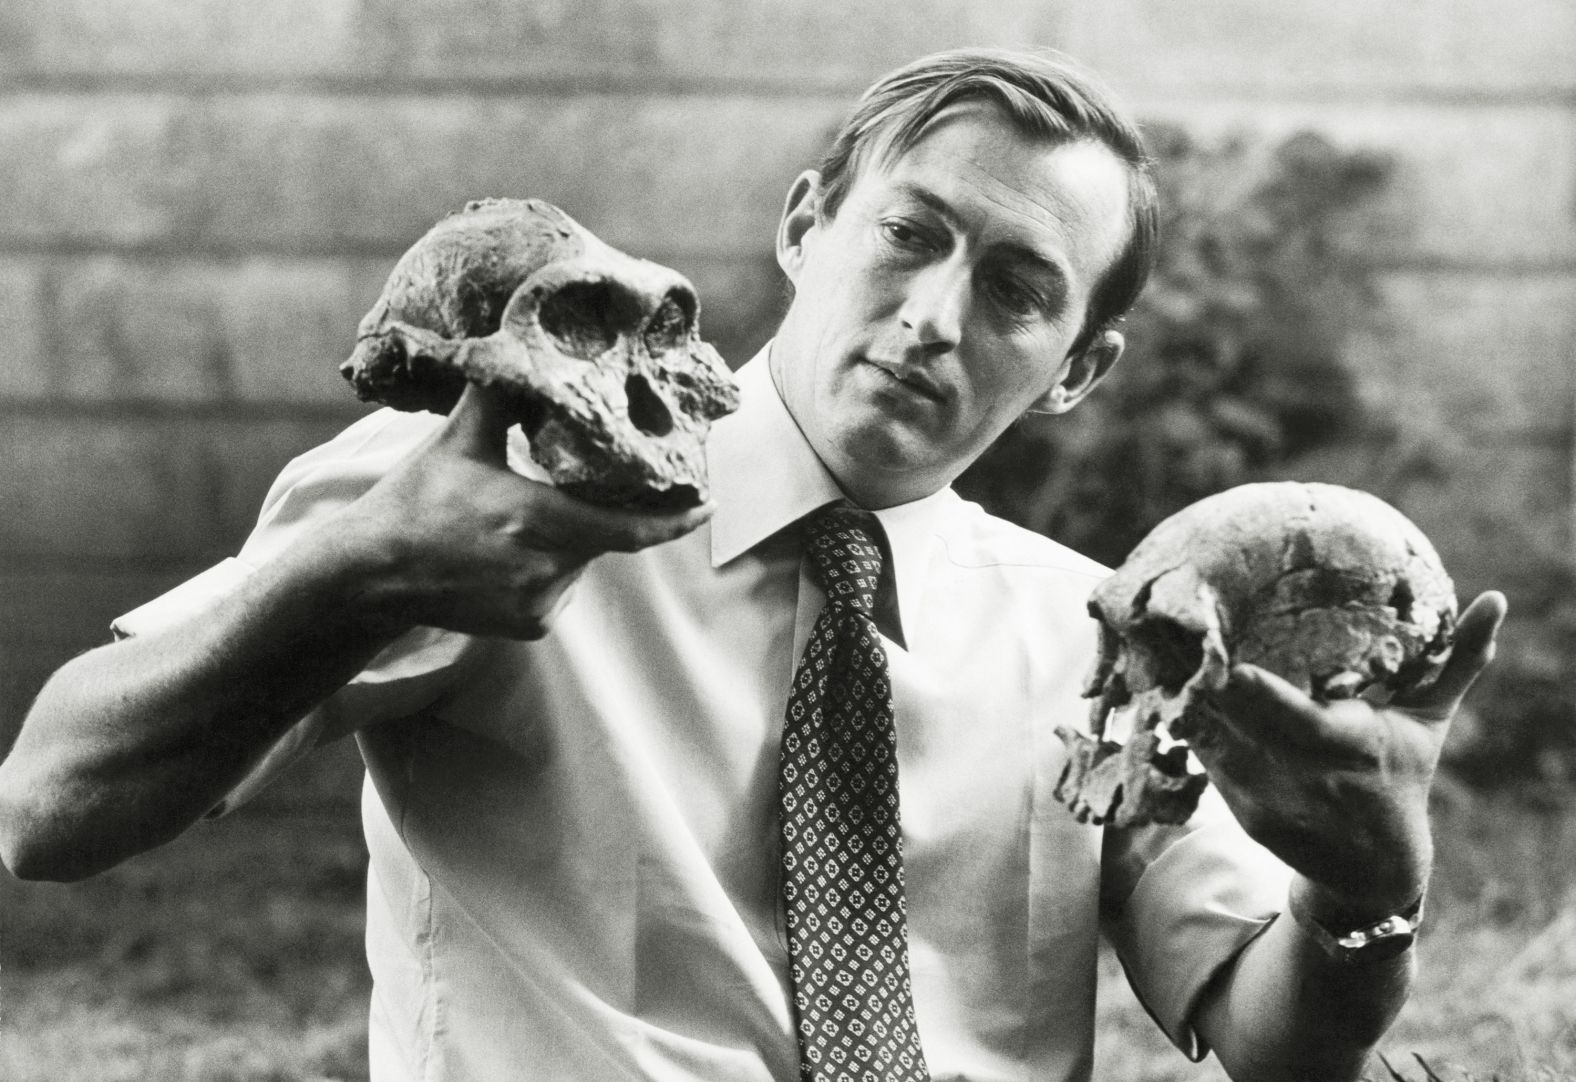 Kenyan paleoanthropologist and conservationist <a href="index.php?page=&url=https%3A%2F%2Fwww.cnn.com%2F2022%2F01%2F02%2Fworld%2Frichard-leakey-death%2Findex.html" target="_blank">Richard Leakey,</a> who unearthed evidence that helped prove humankind evolved in Africa, died January 2 at the age of 77.